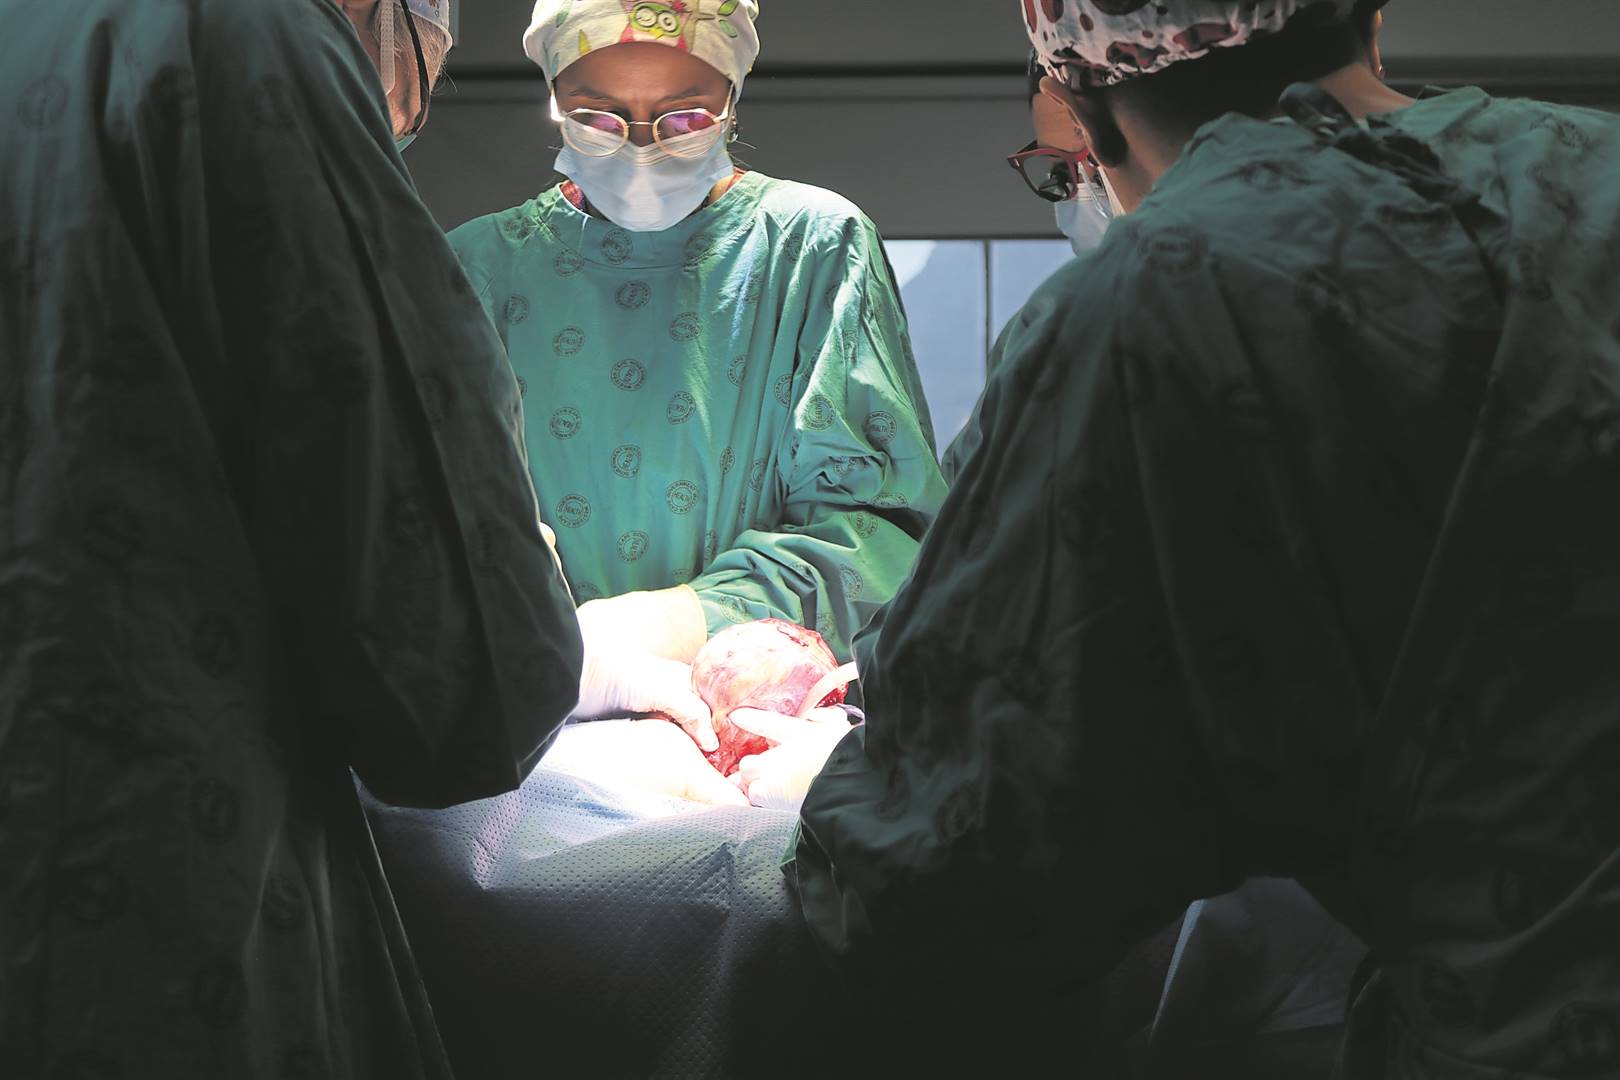 A team of specialised surgeons remove a Wilms tumour from a 4-year-old patient. PHOTO: KAYLYNNE BANTOM